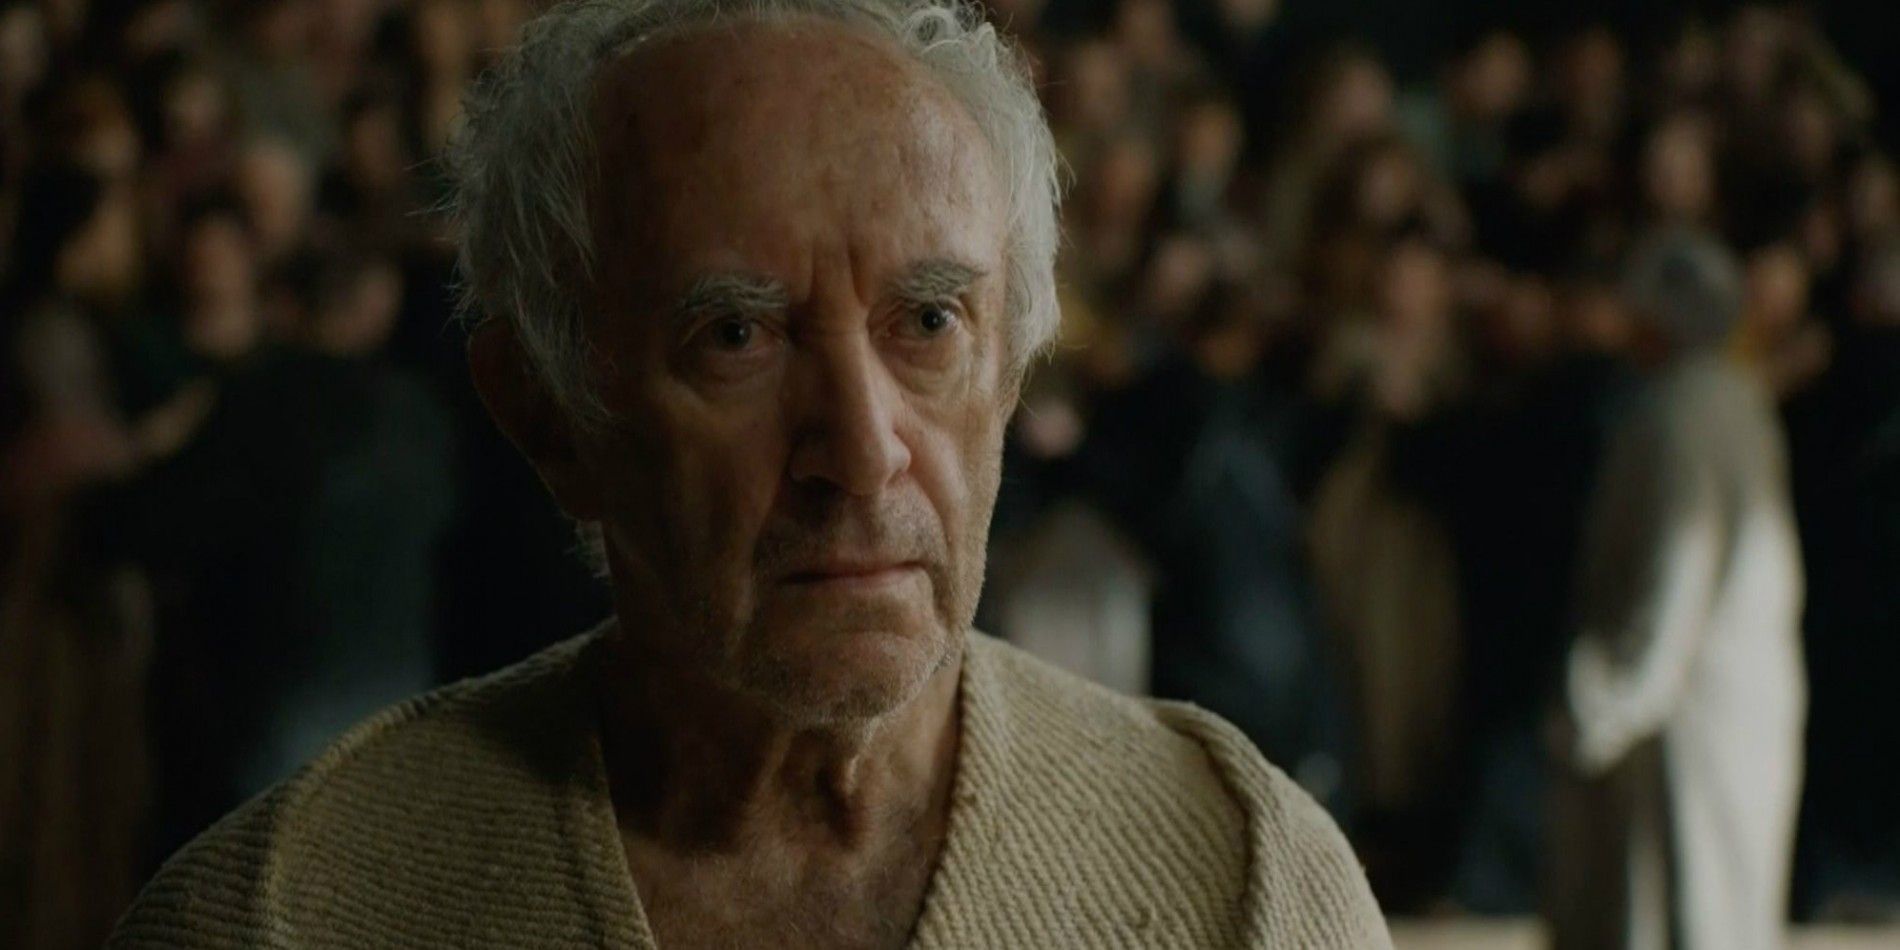 High Sparrow looking serious from the Game of Thrones